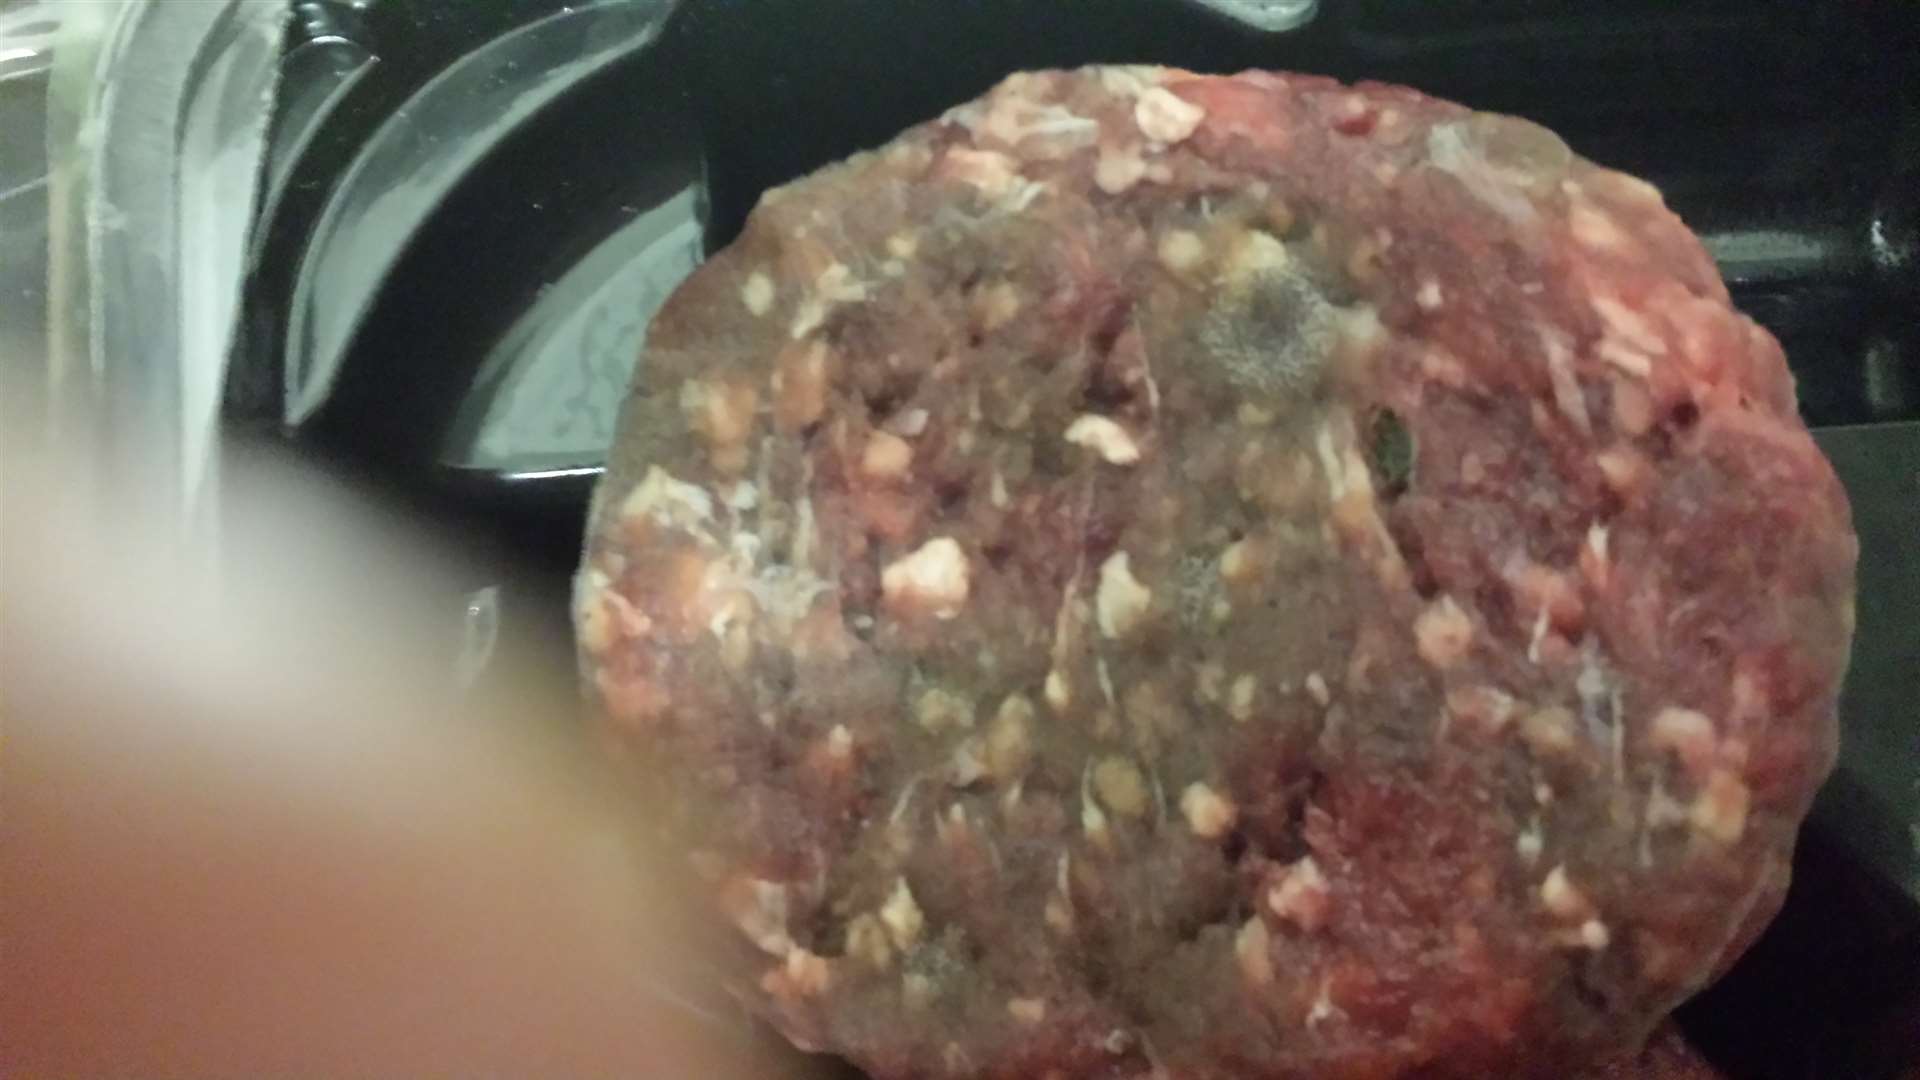 The mouldy venison burger bought from Asda